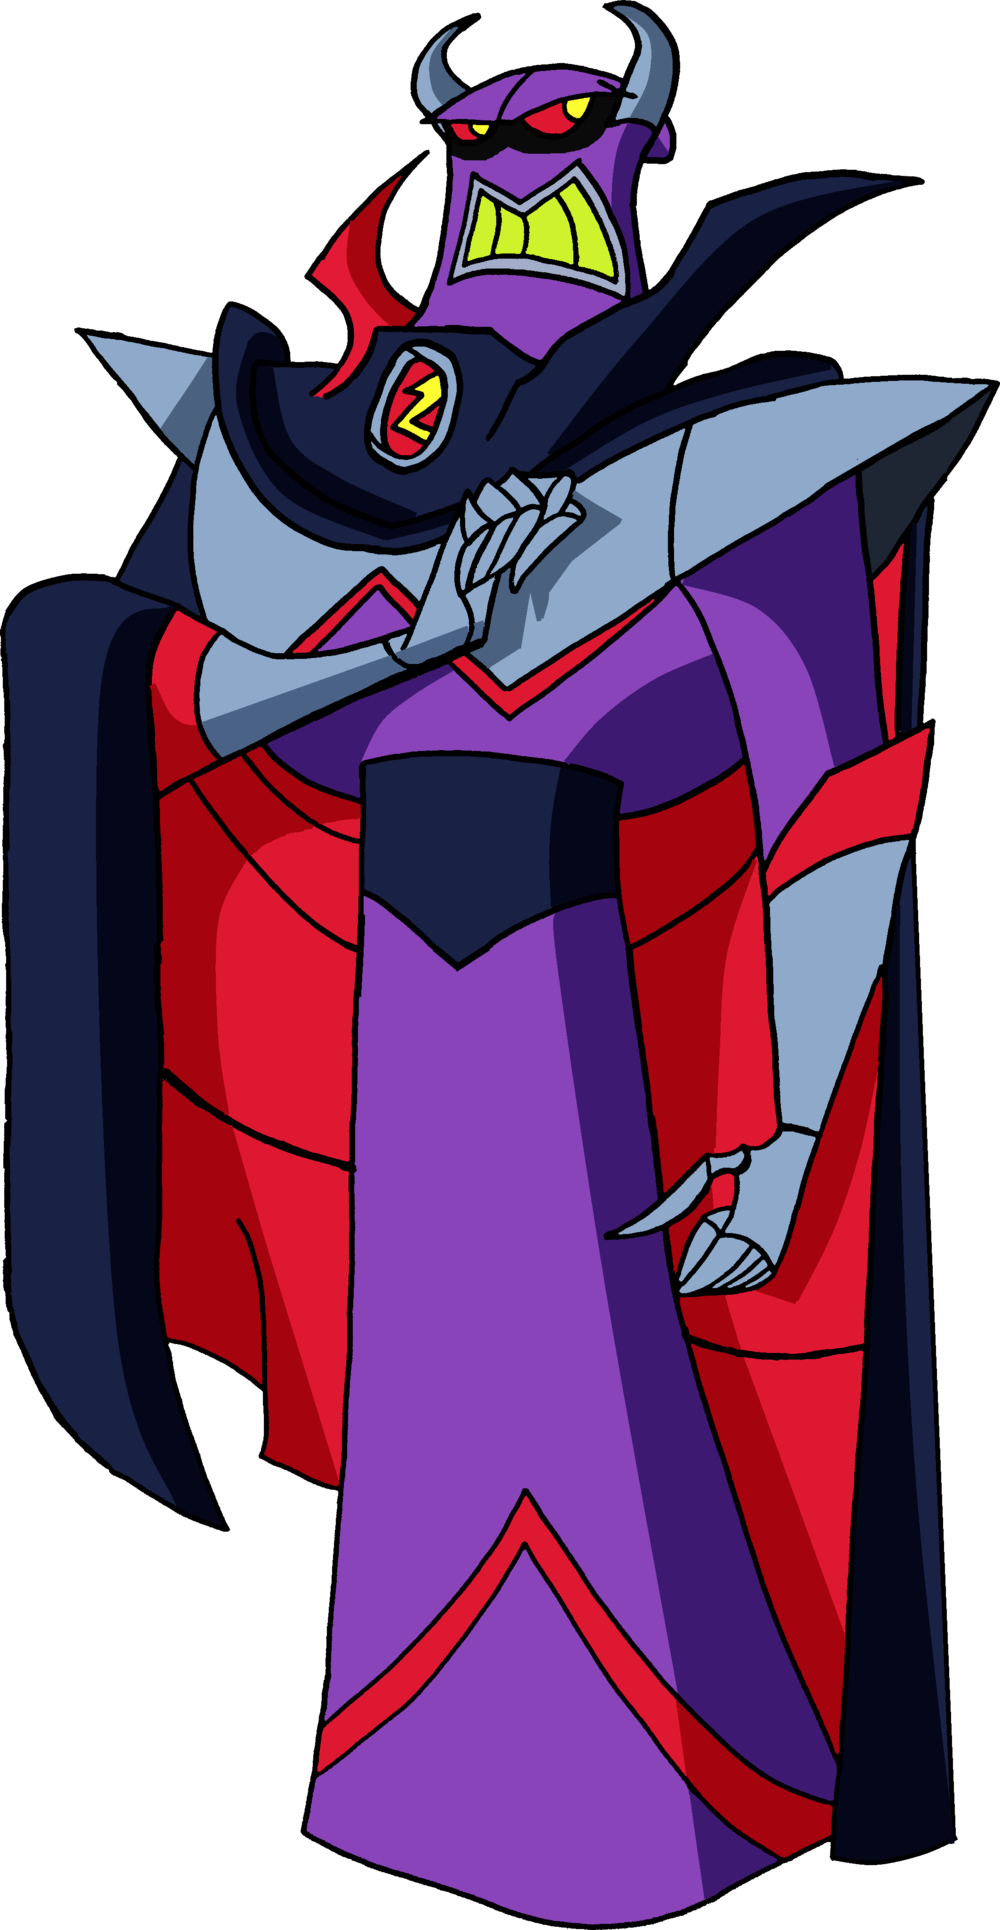 image of Emperor Zurg from the Toy Story franchise. Disney pixar movies, Toy story, Pixar movies